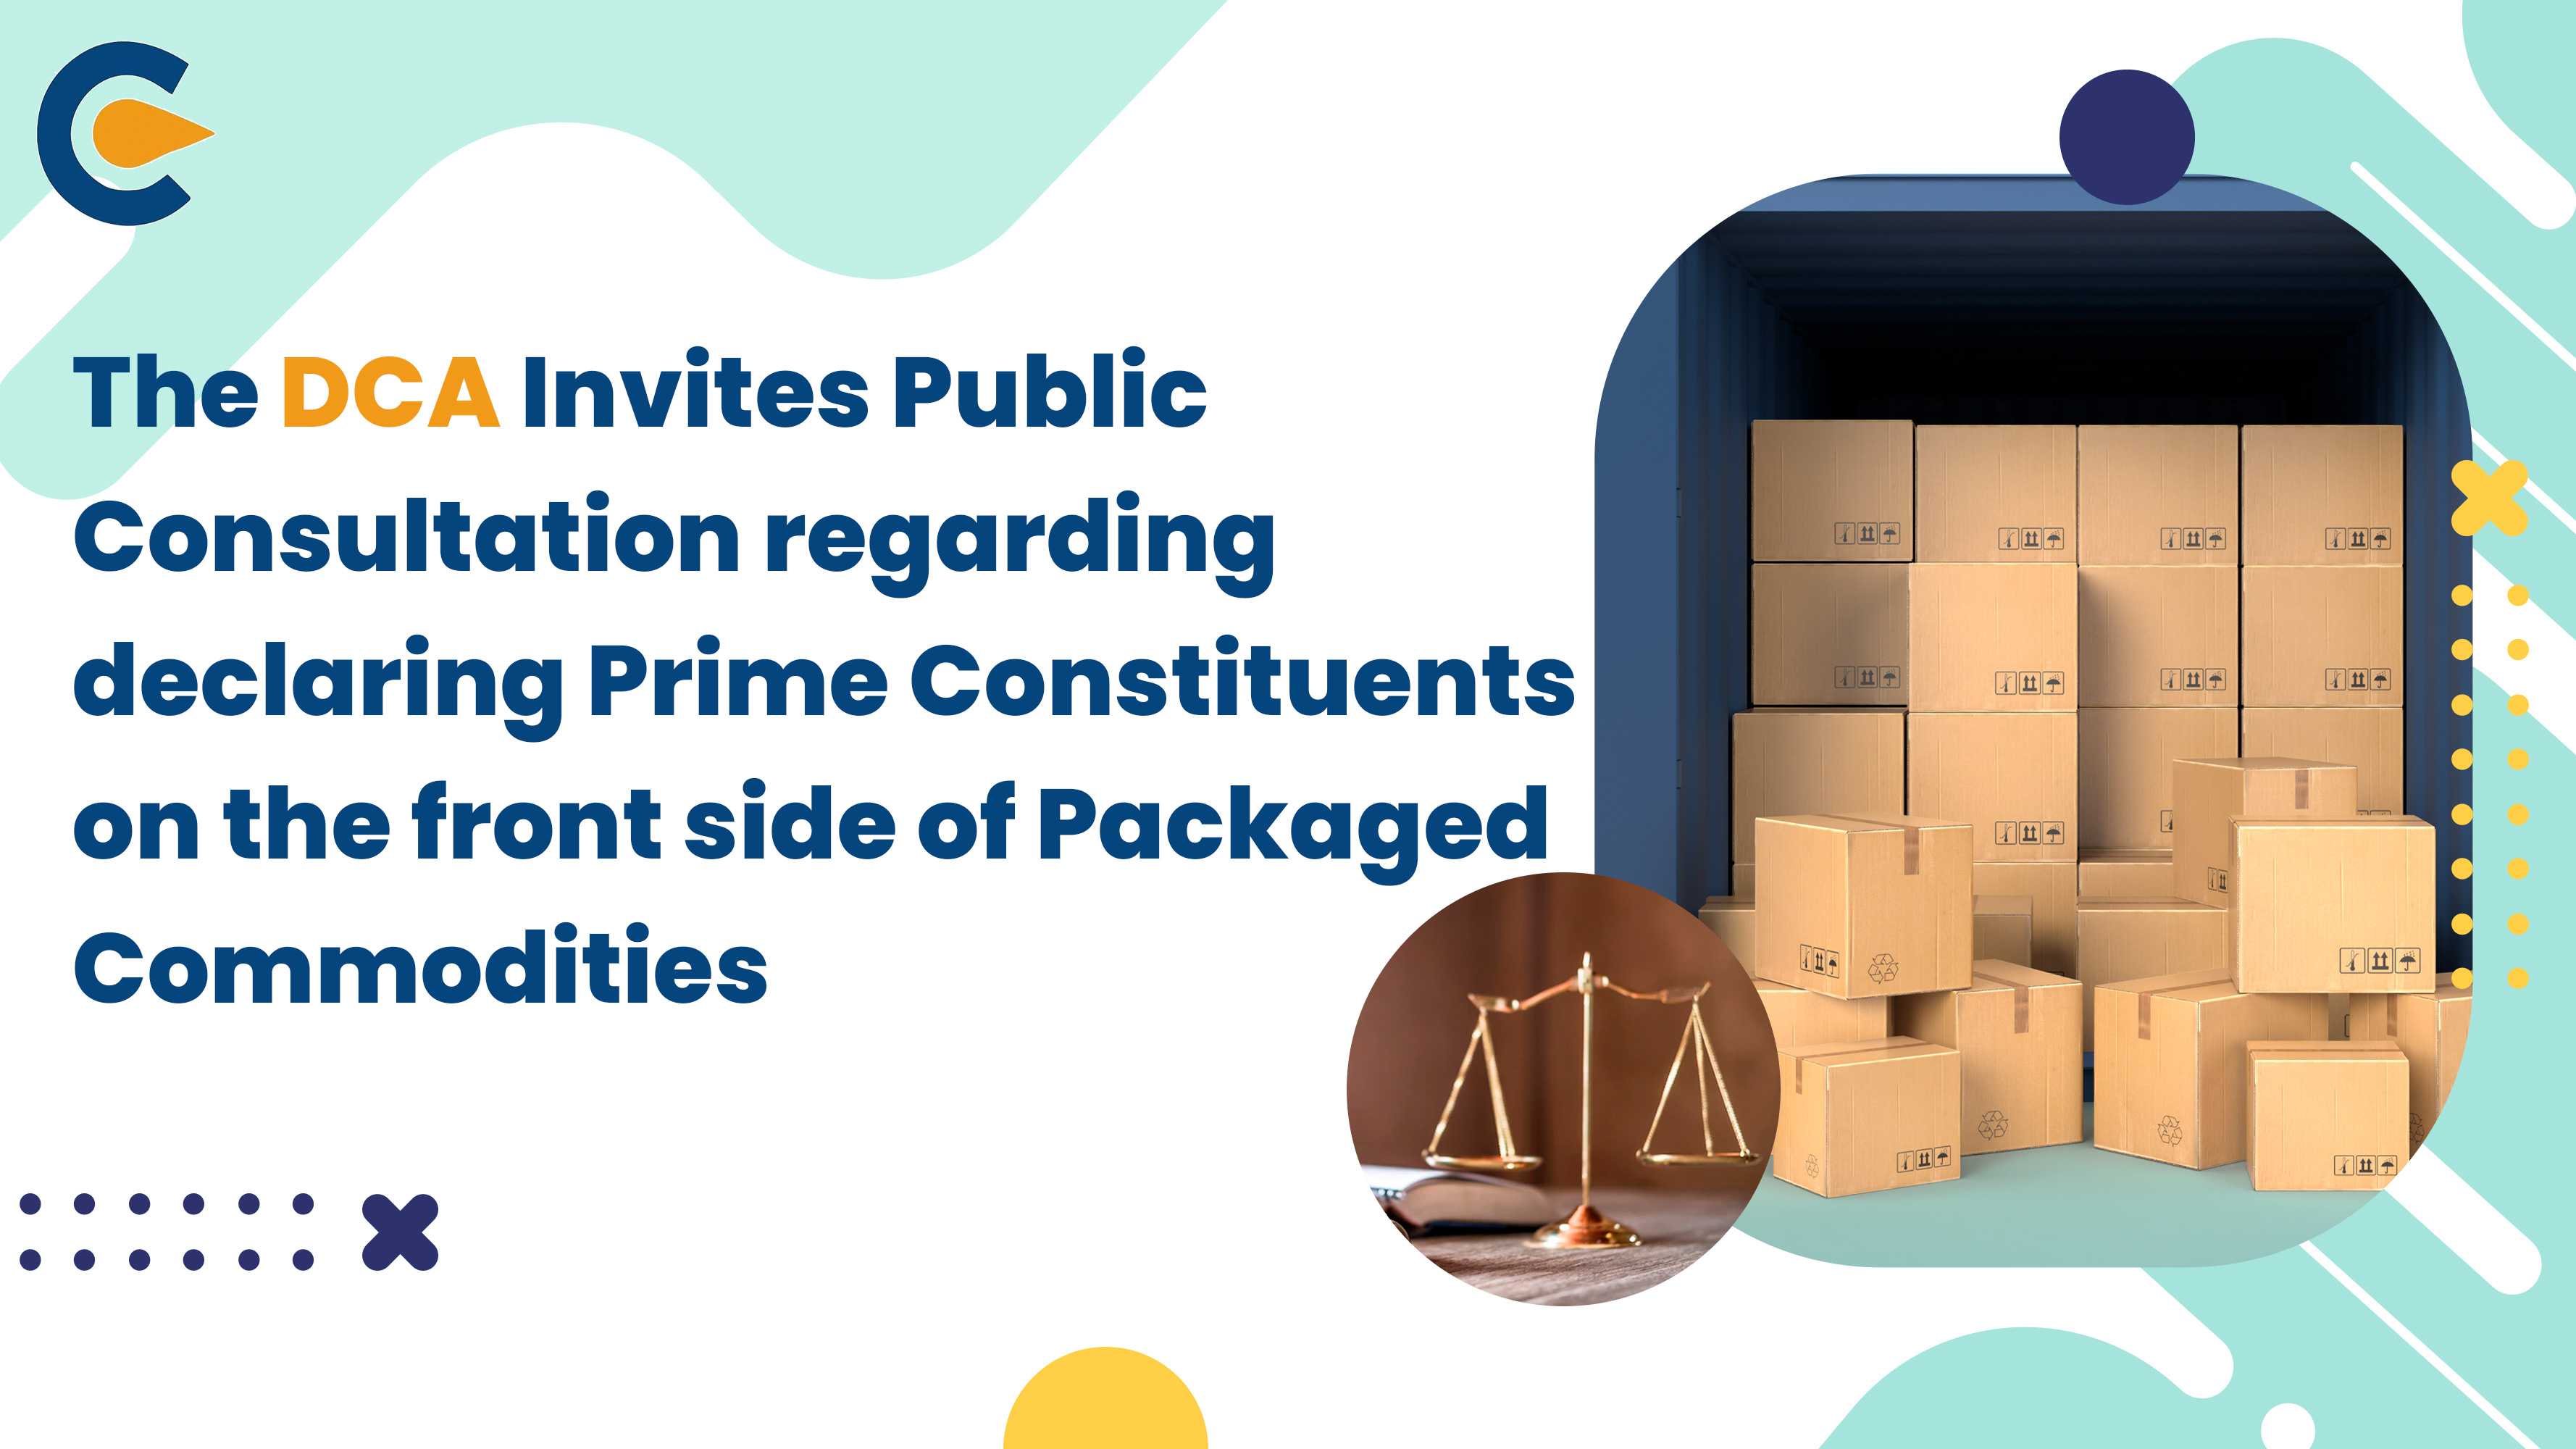 The DCA Invites Public Consultation regarding declaring Prime Constituents on the front side of Packaged Commodities